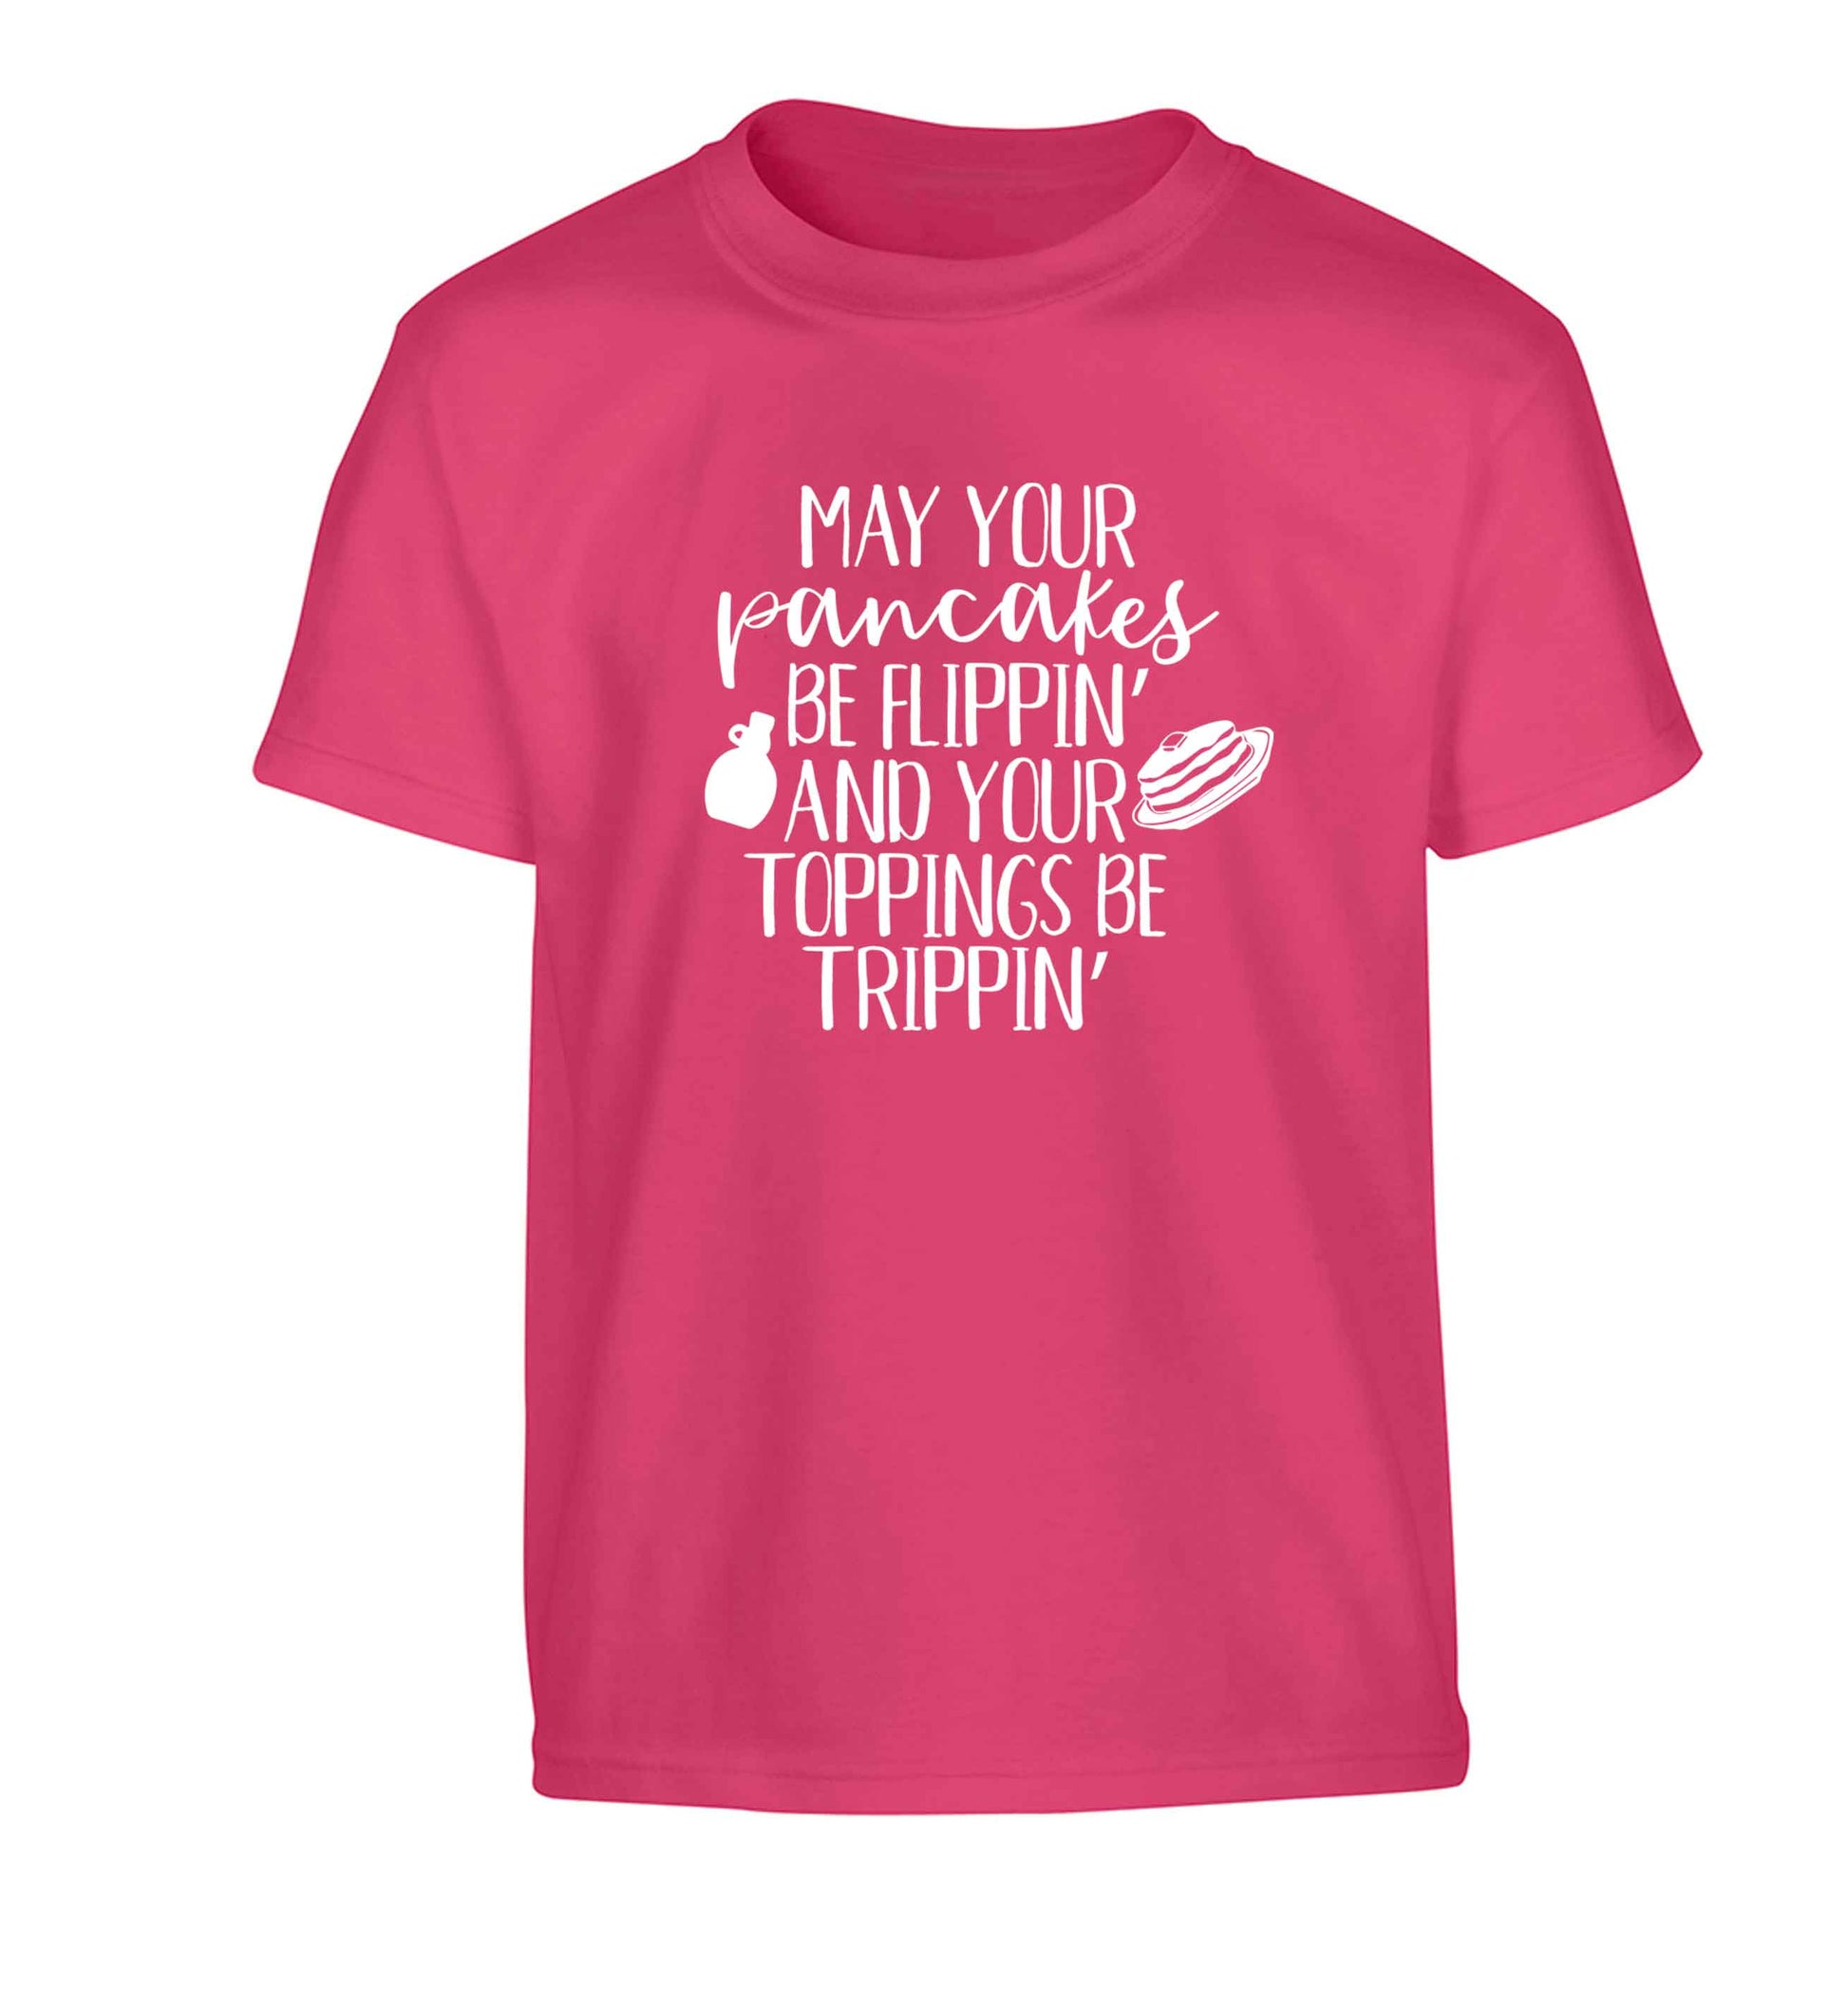 May your pancakes be flippin' and your toppings be trippin' Children's pink Tshirt 12-13 Years